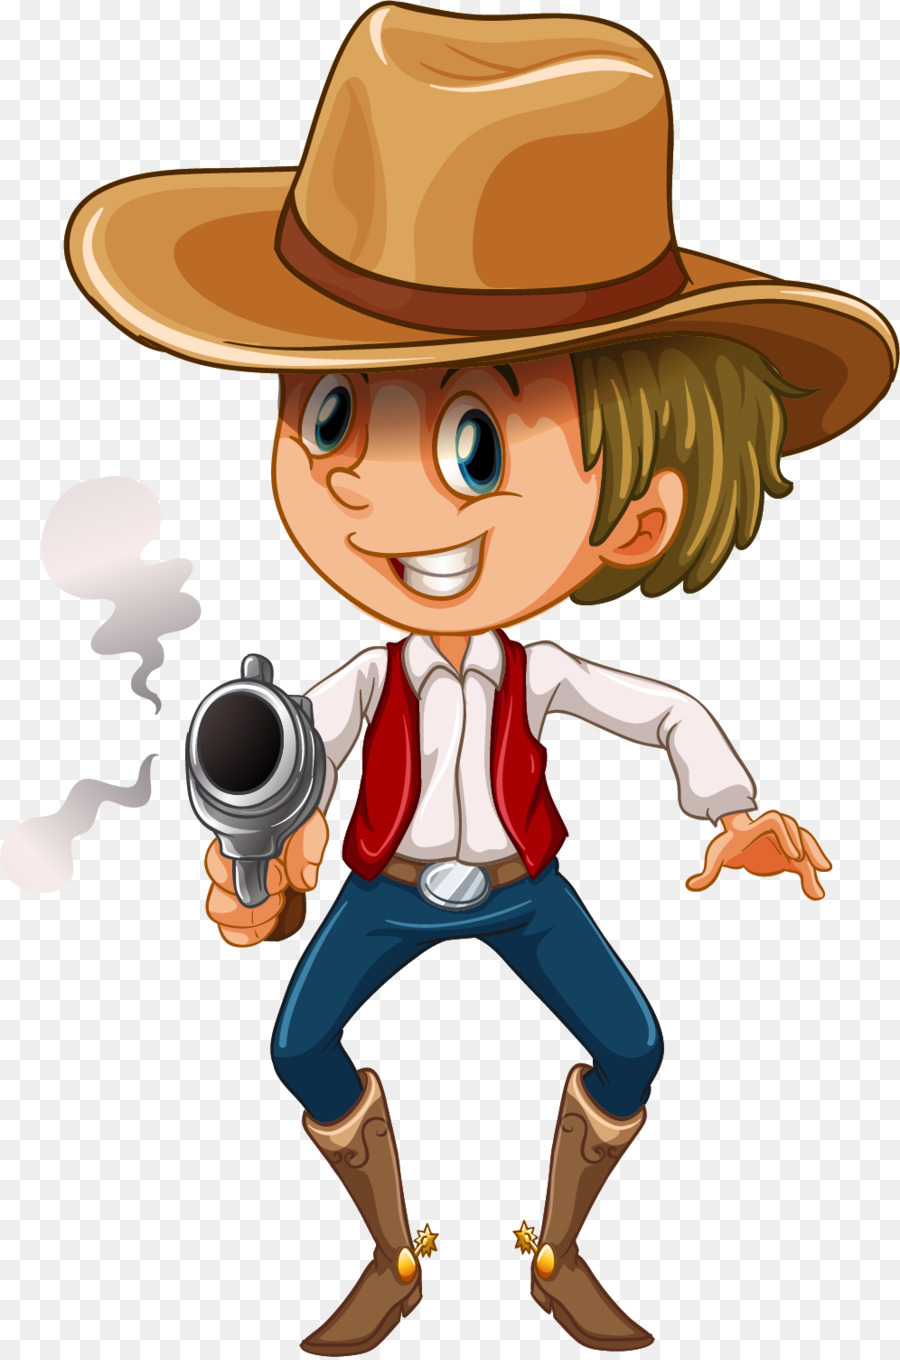 American frontier Cowboy Royalty-free Illustration - Guns, cowboys png download - 996*1502 - Free Transparent American Frontier png Download.